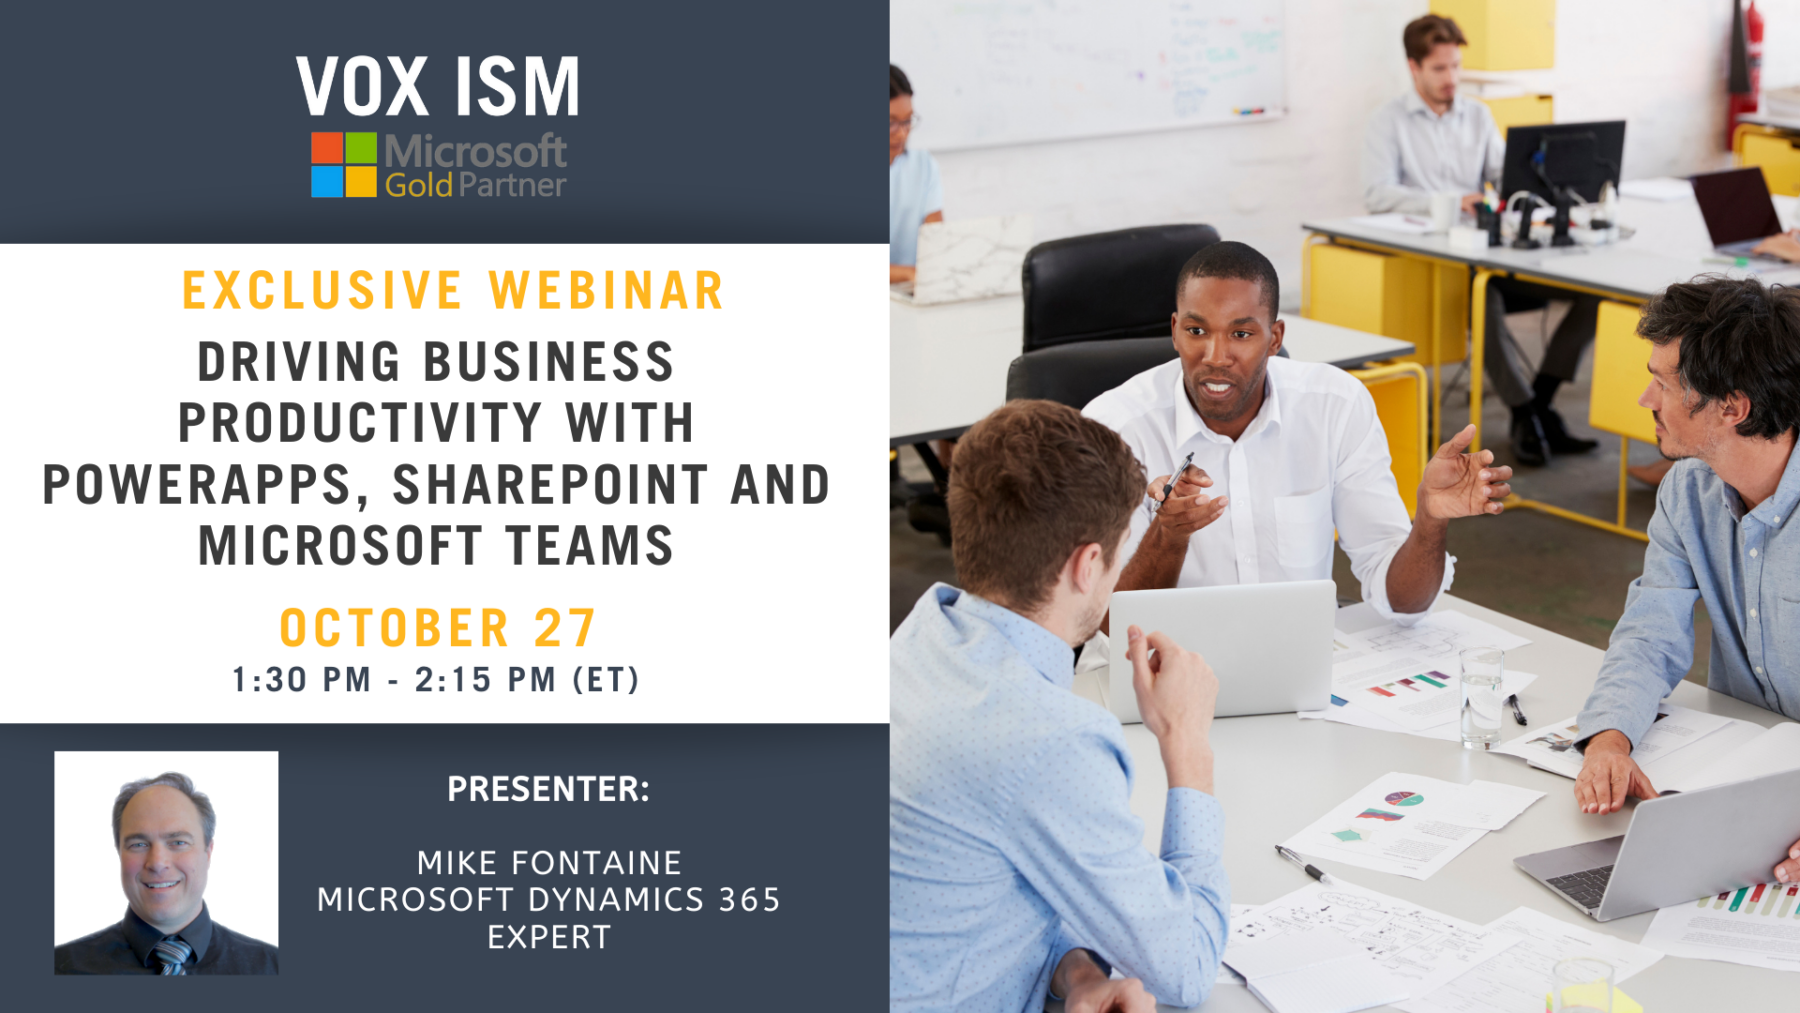 Driving business productivity with PowerApps, Microsoft Teams and SharePoint - October 27 - Webinar